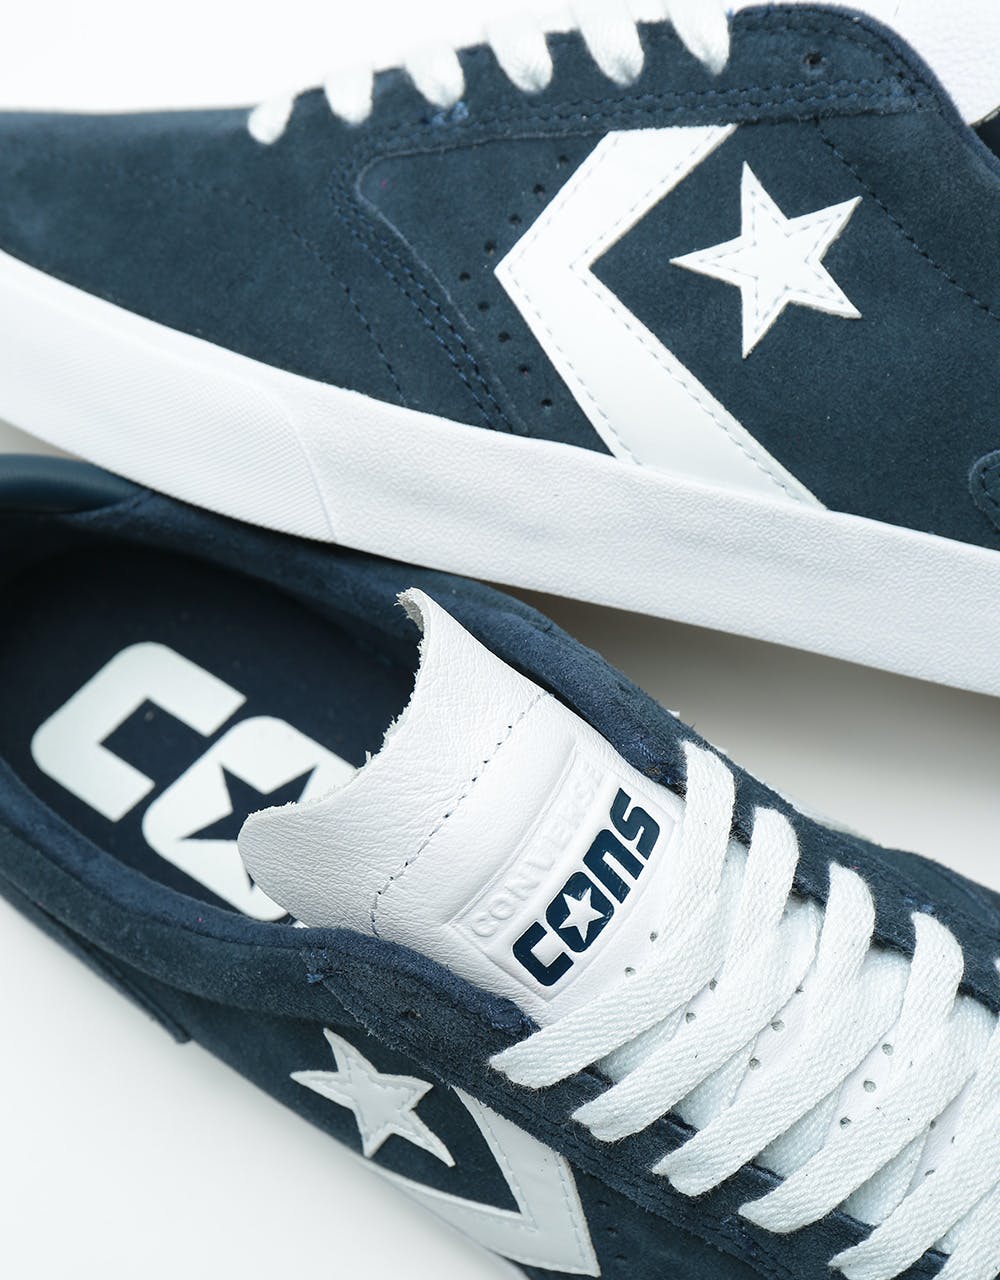 Converse Checkpoint Pro Ox Suede Skate Shoes - Obsidian/Wolf Grey/Whit